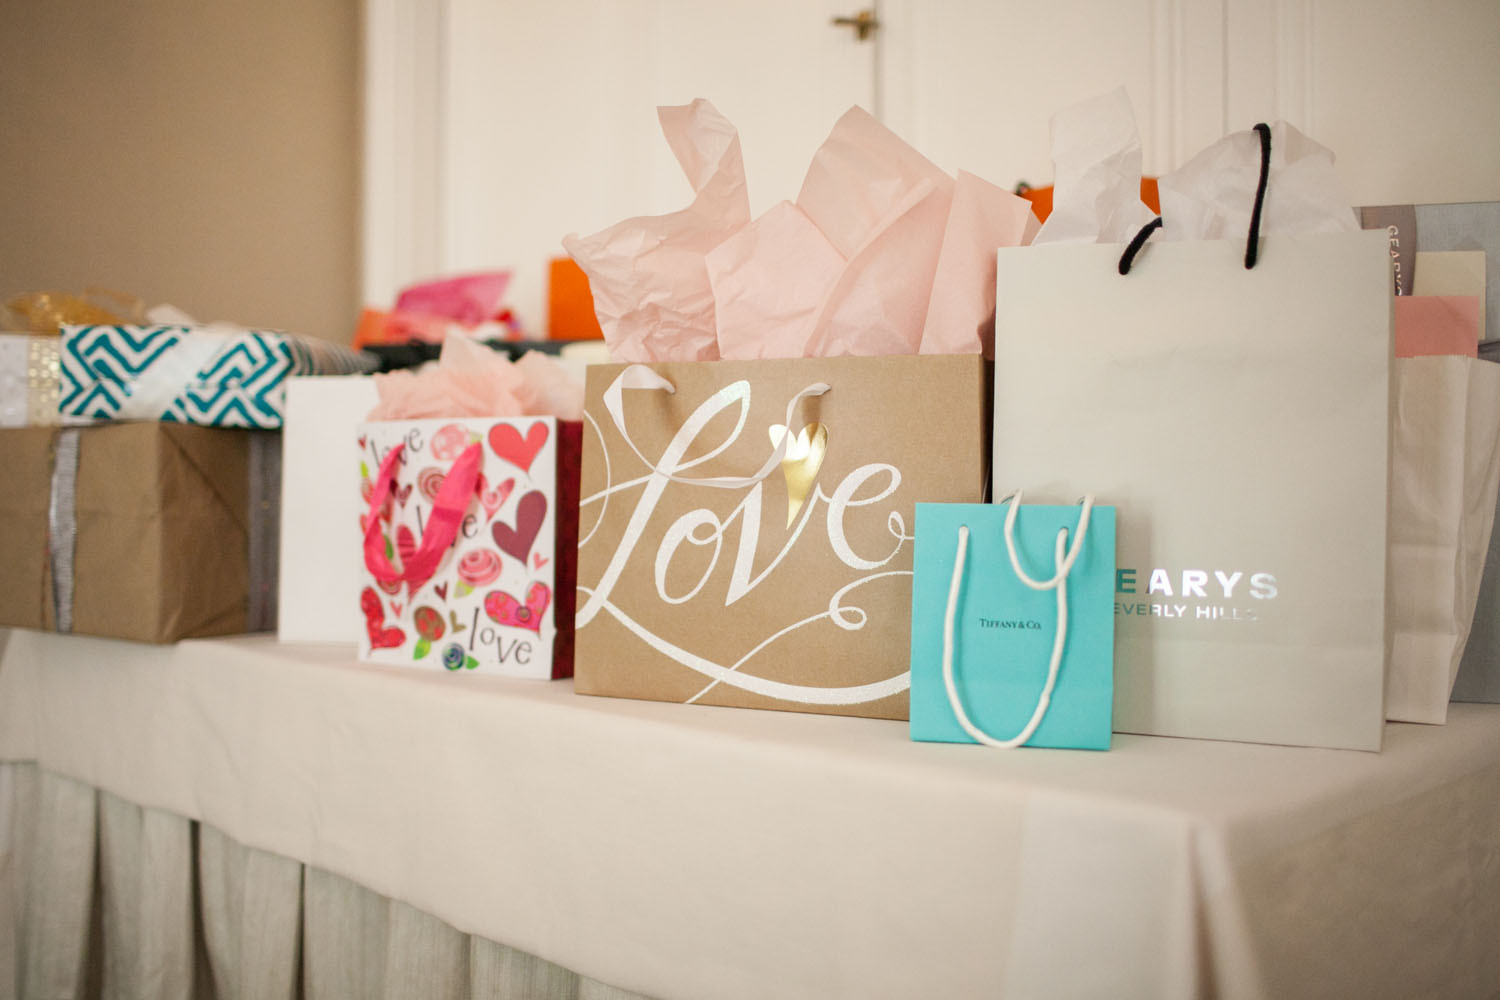 Bridal Shower Gifts Vs Wedding Gifts
 Wedding Registry Gift Registry vs Giving to Charity